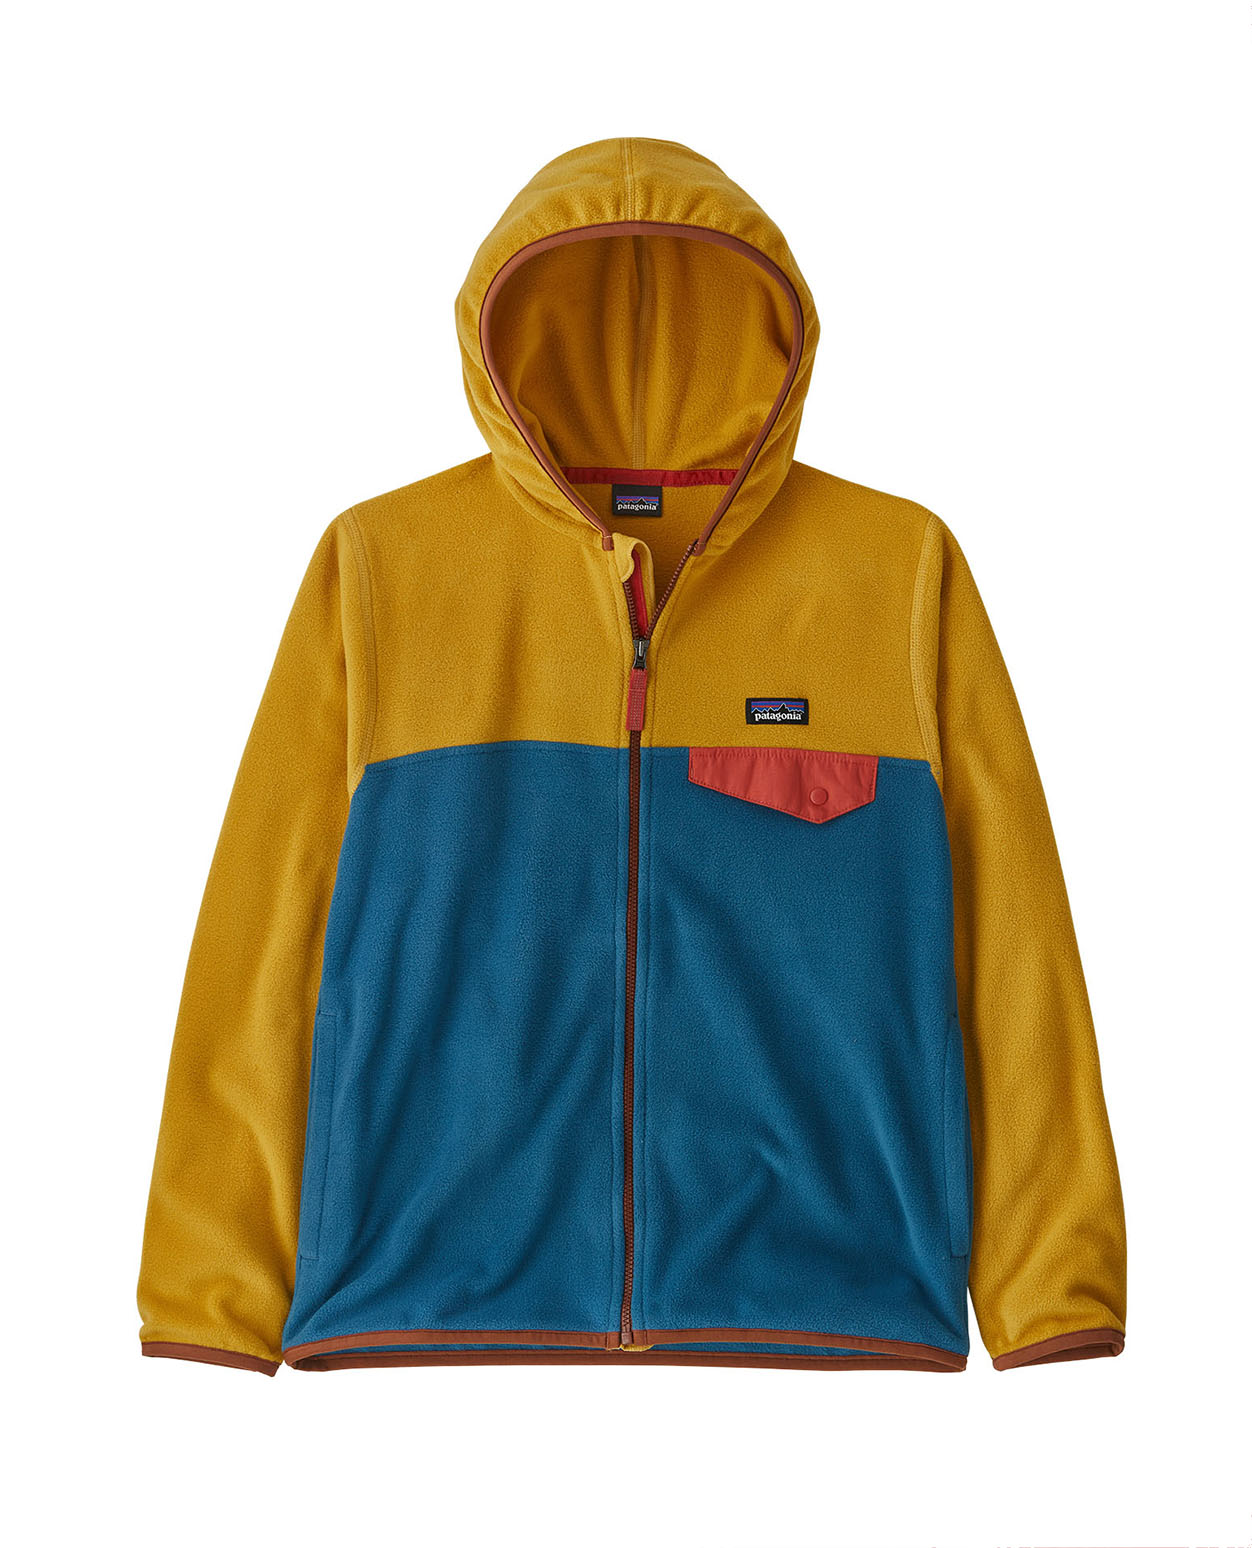 Patagonia Kids Micro D Snap-T Jacket Wavy Blue Cabin Gold